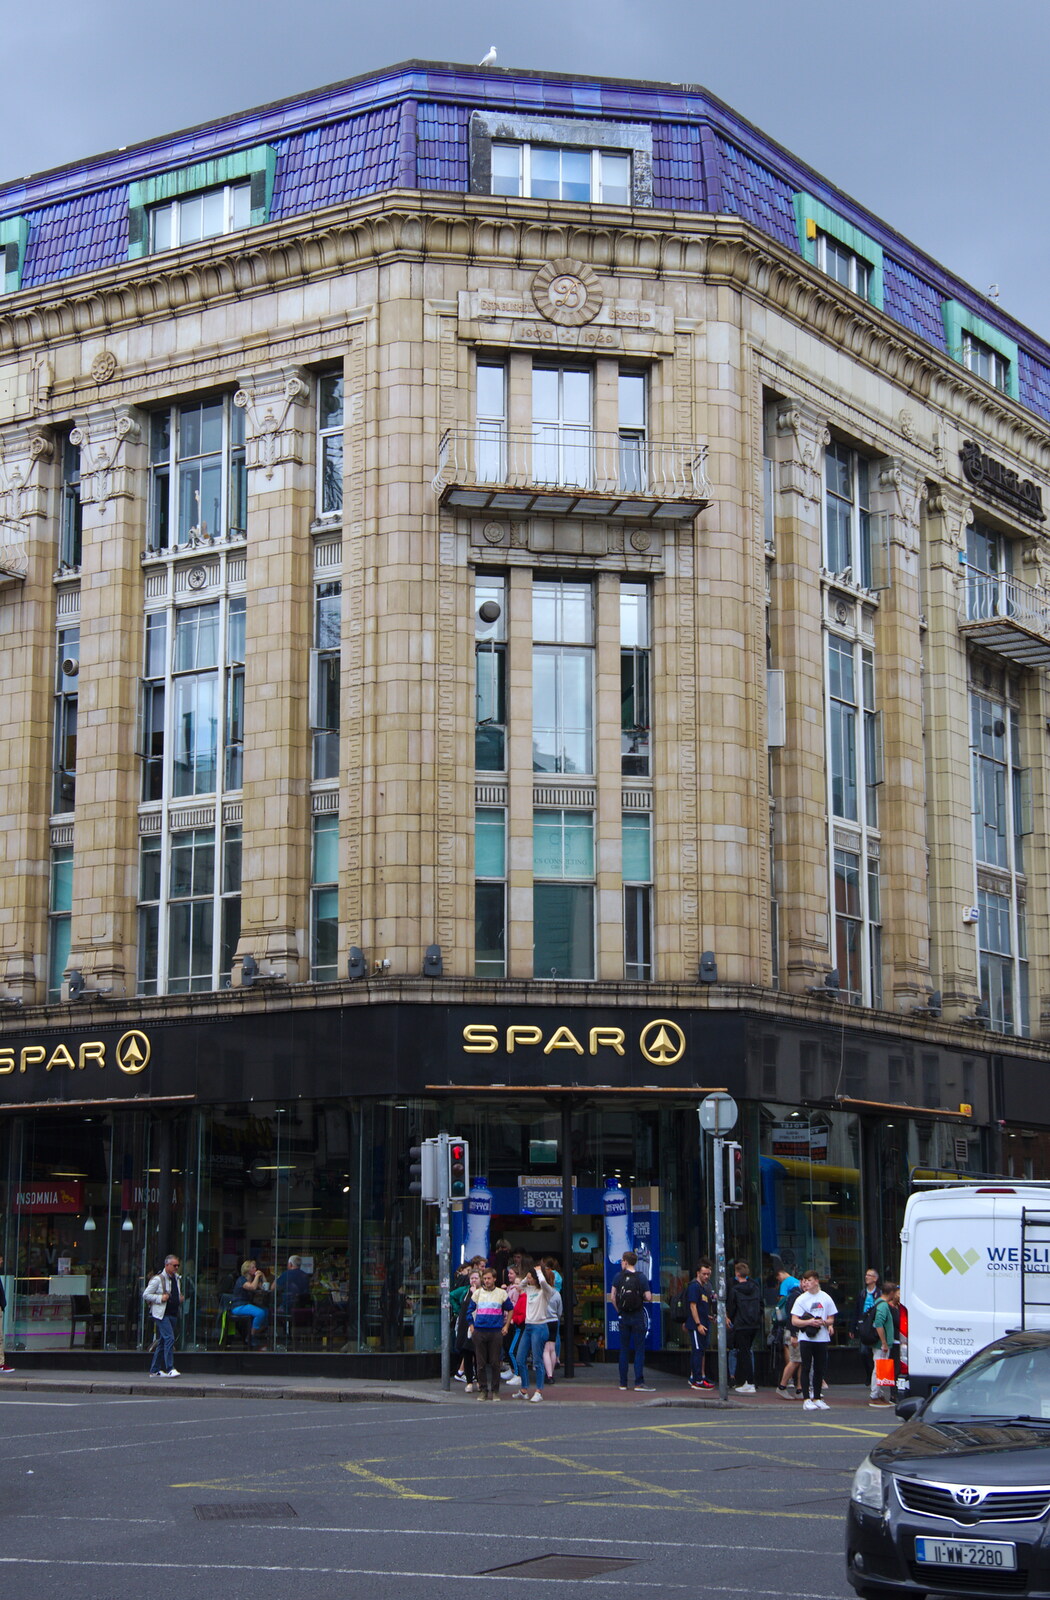 Lovely 1920s Spar building from Busking in Temple Bar, Dublin, Ireland - 12th August 2019